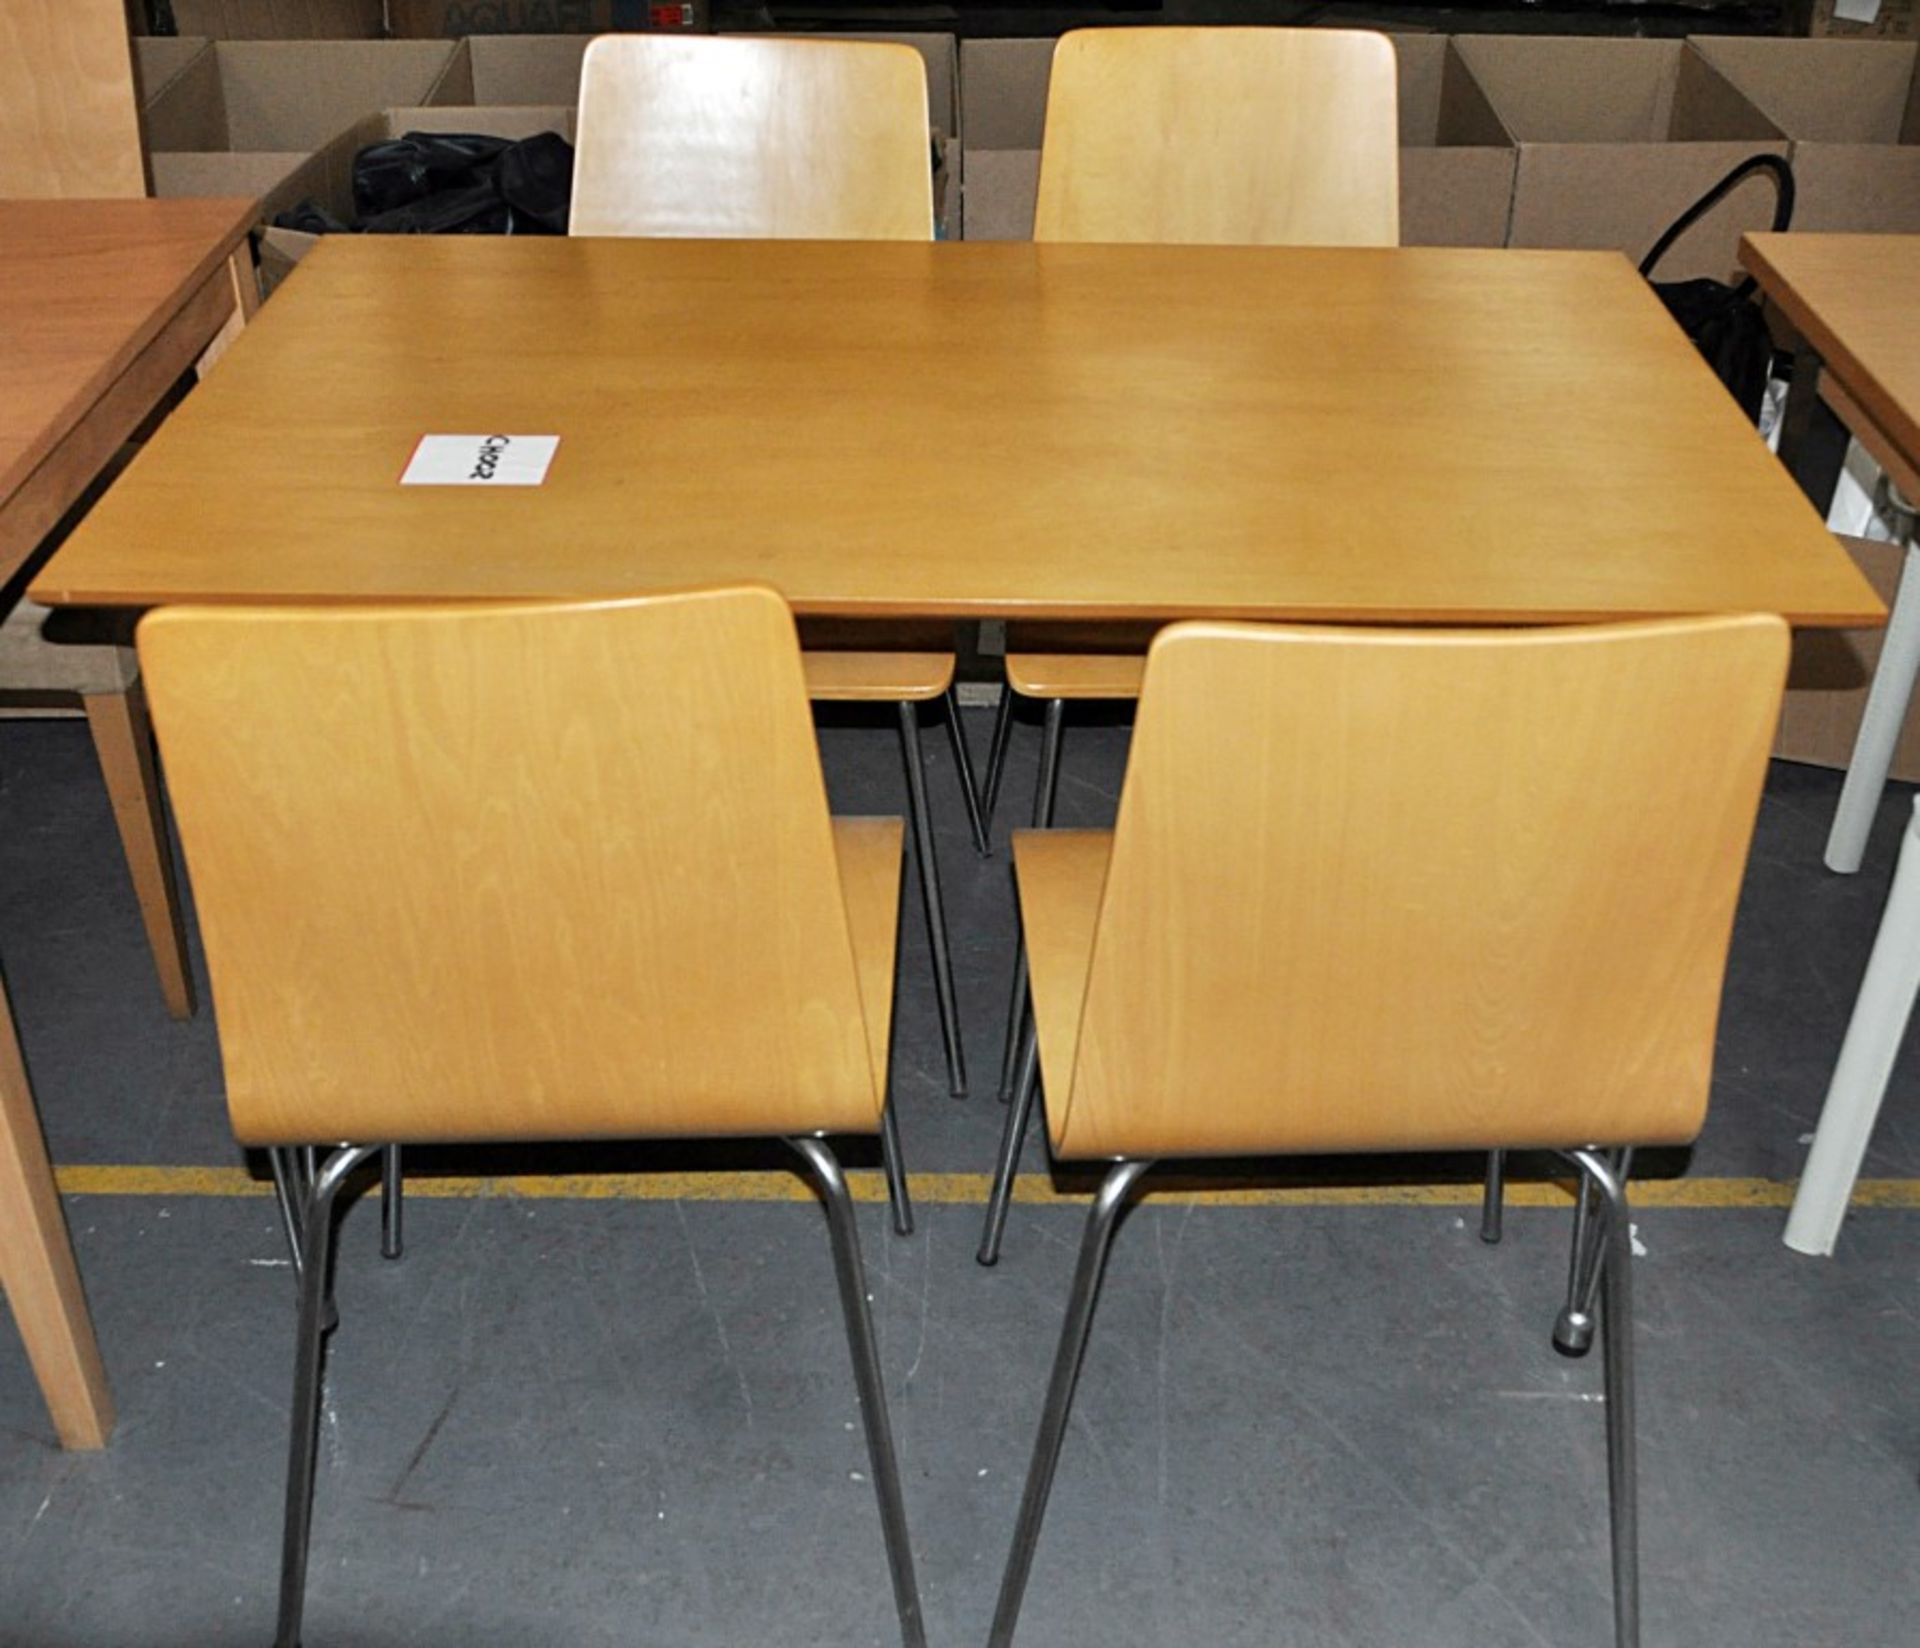 1 x Beech 4ft Table With 4 x Matching Beech Chairs - Ref CH002 – Features Metal Legs, and A